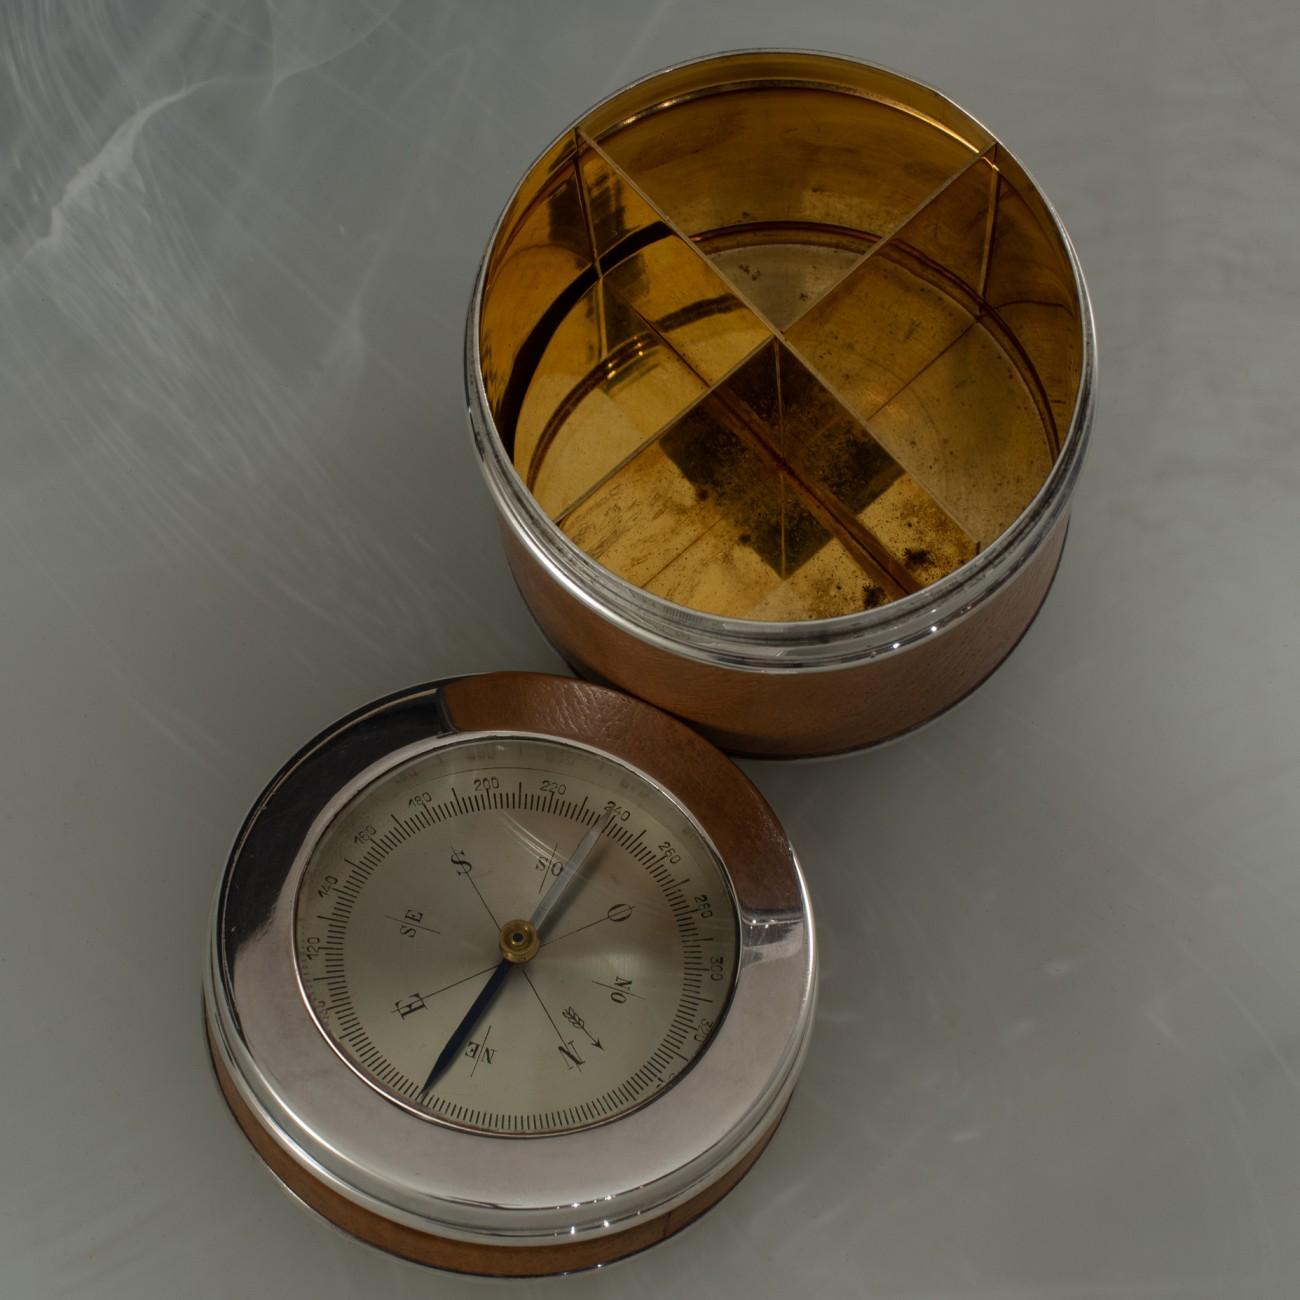 Stylish Hermès pigskin and silver plated pot with compass in the lid and gilded interior, originally designed to hold cigarettes, circa 1930 and fully marked on the base. With a typically stylish detail; the steel compass needle is blued on the